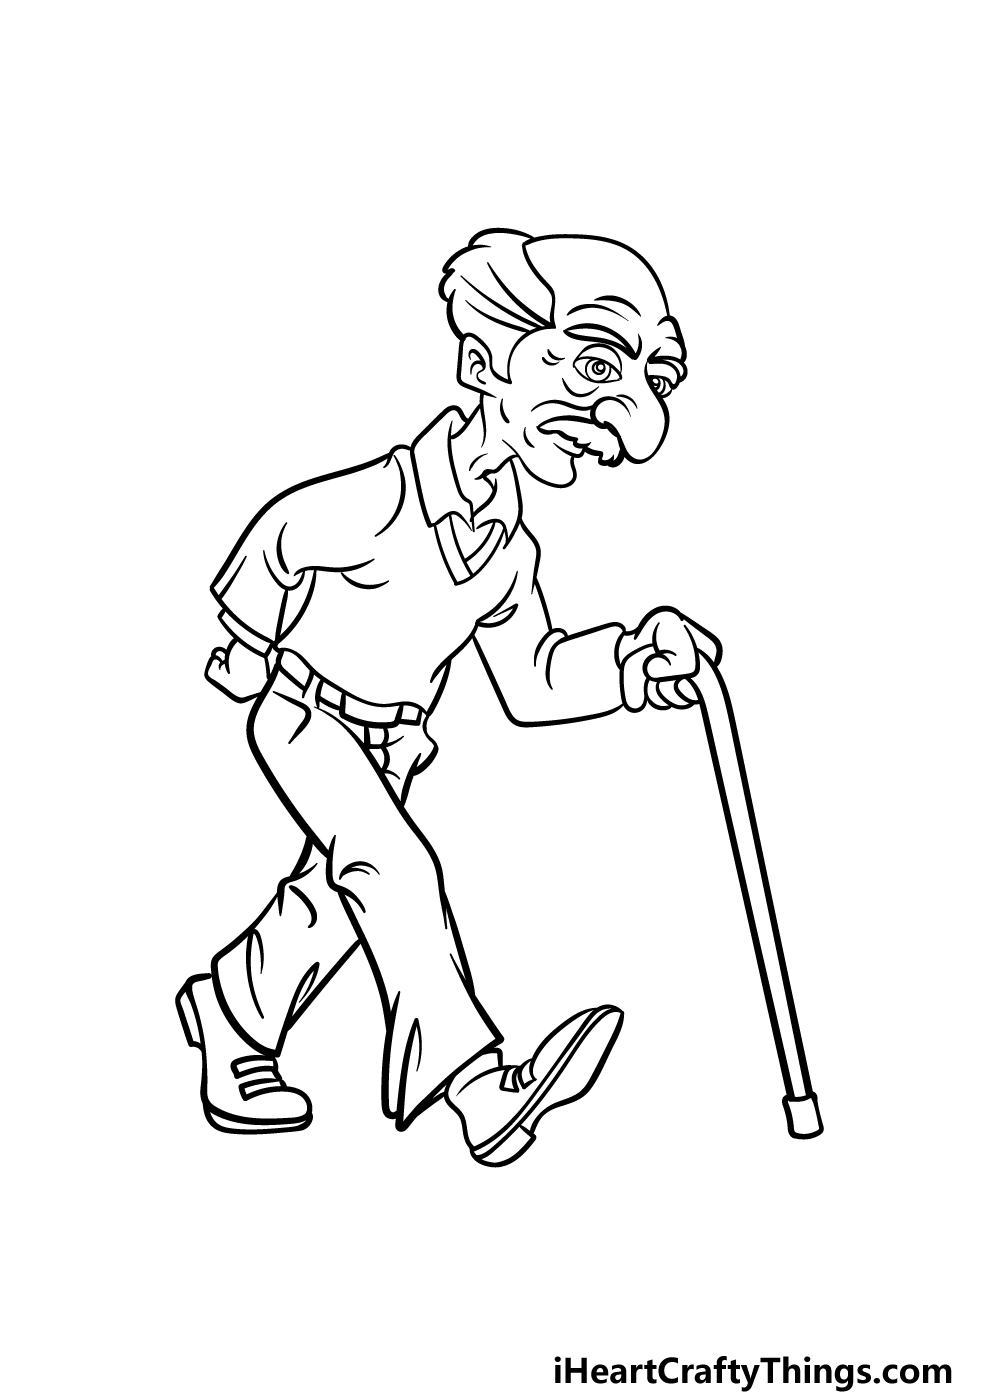 how to draw an old man step 5